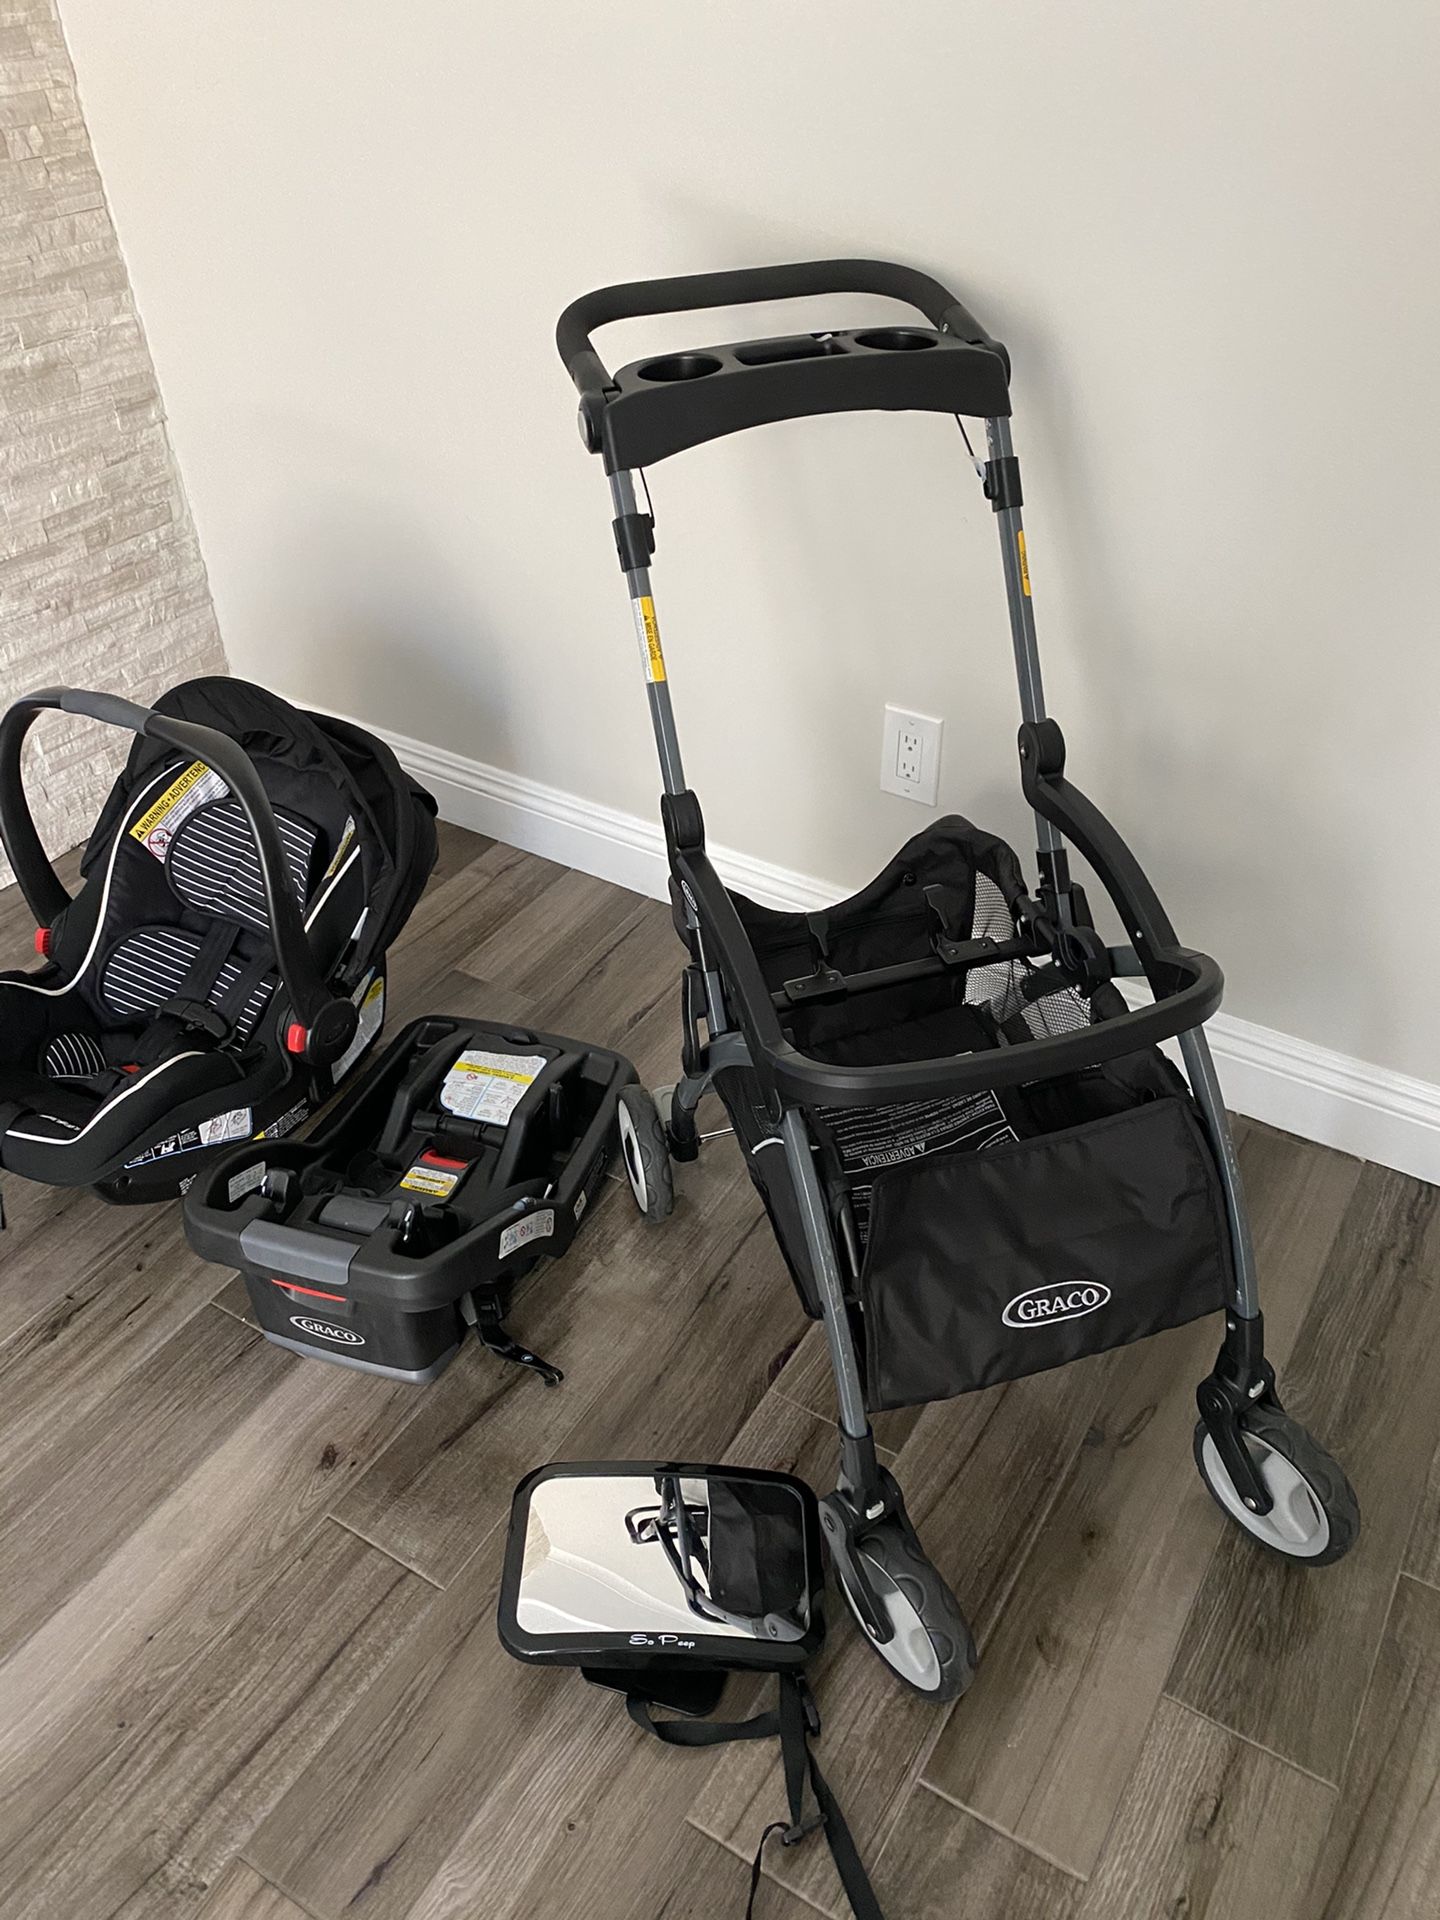 Graco stroller and carseat ( travel system)